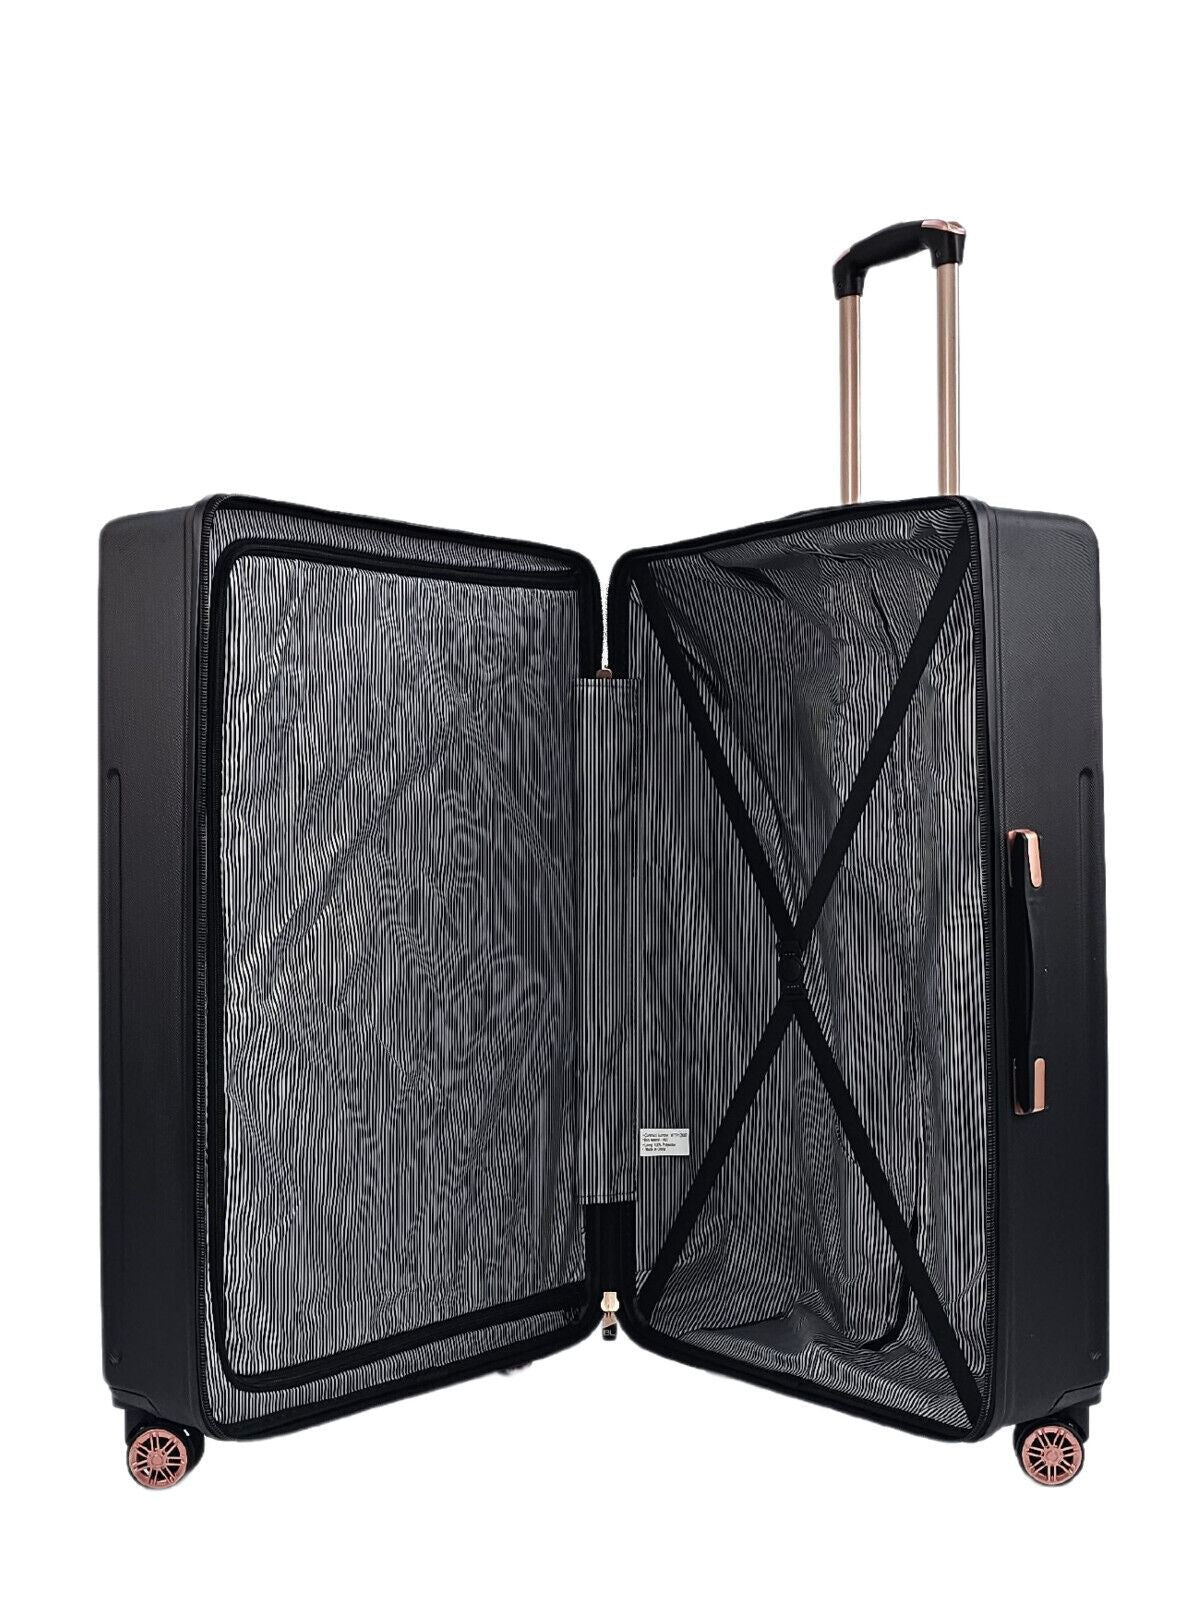 Columbia Large Soft Shell Suitcase in Black